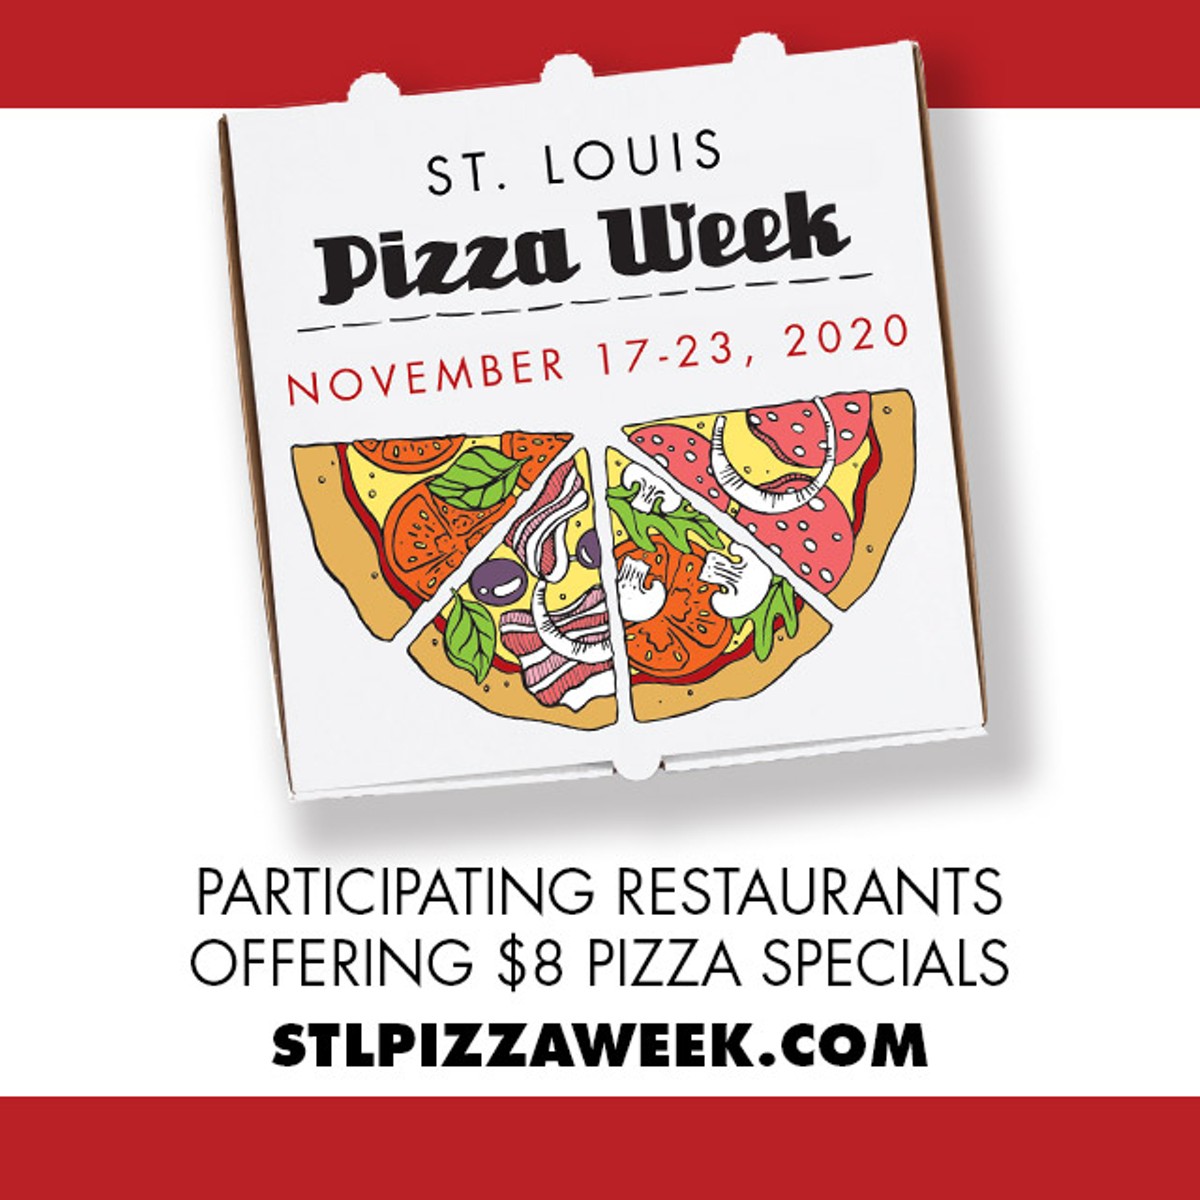 St. Louis Pizza Week | Promotional Event | St. Louis News and Events | Riverfront Times